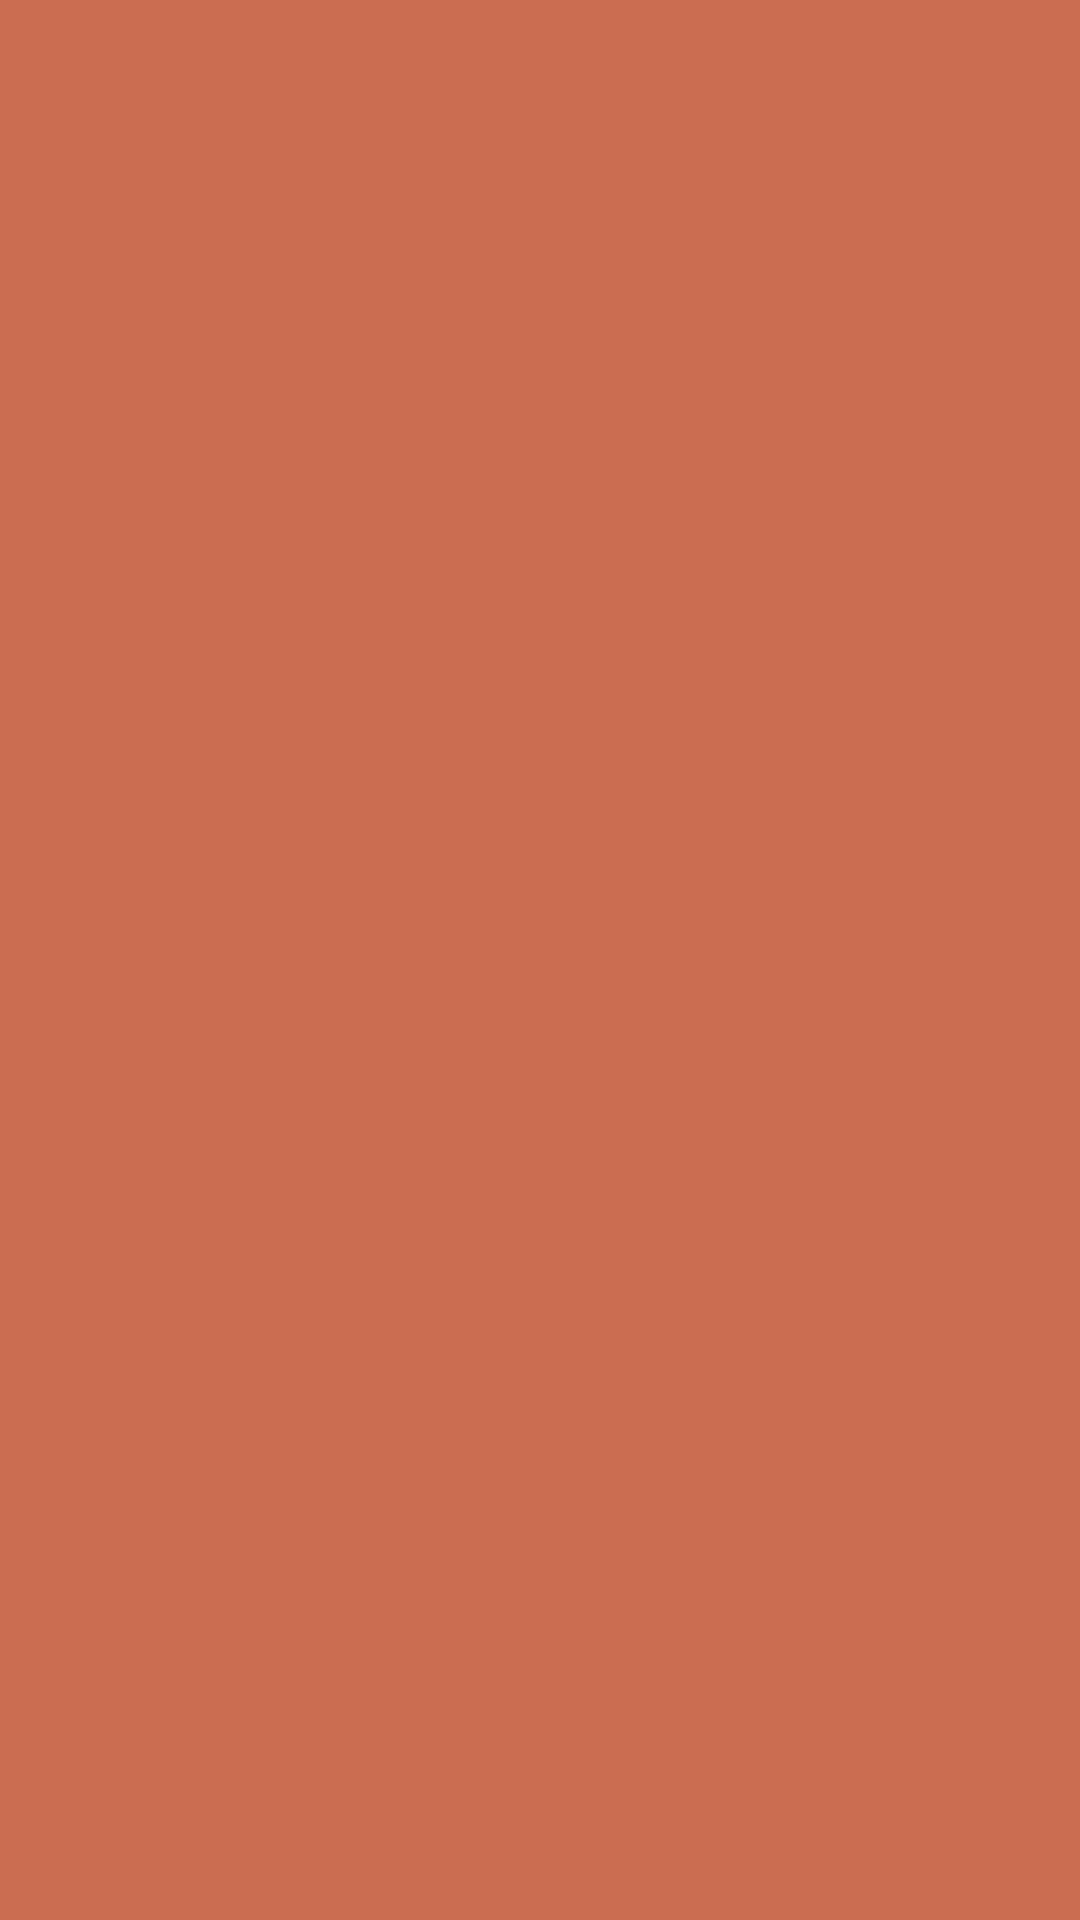 1080x1920 Copper Red Solid Color Background